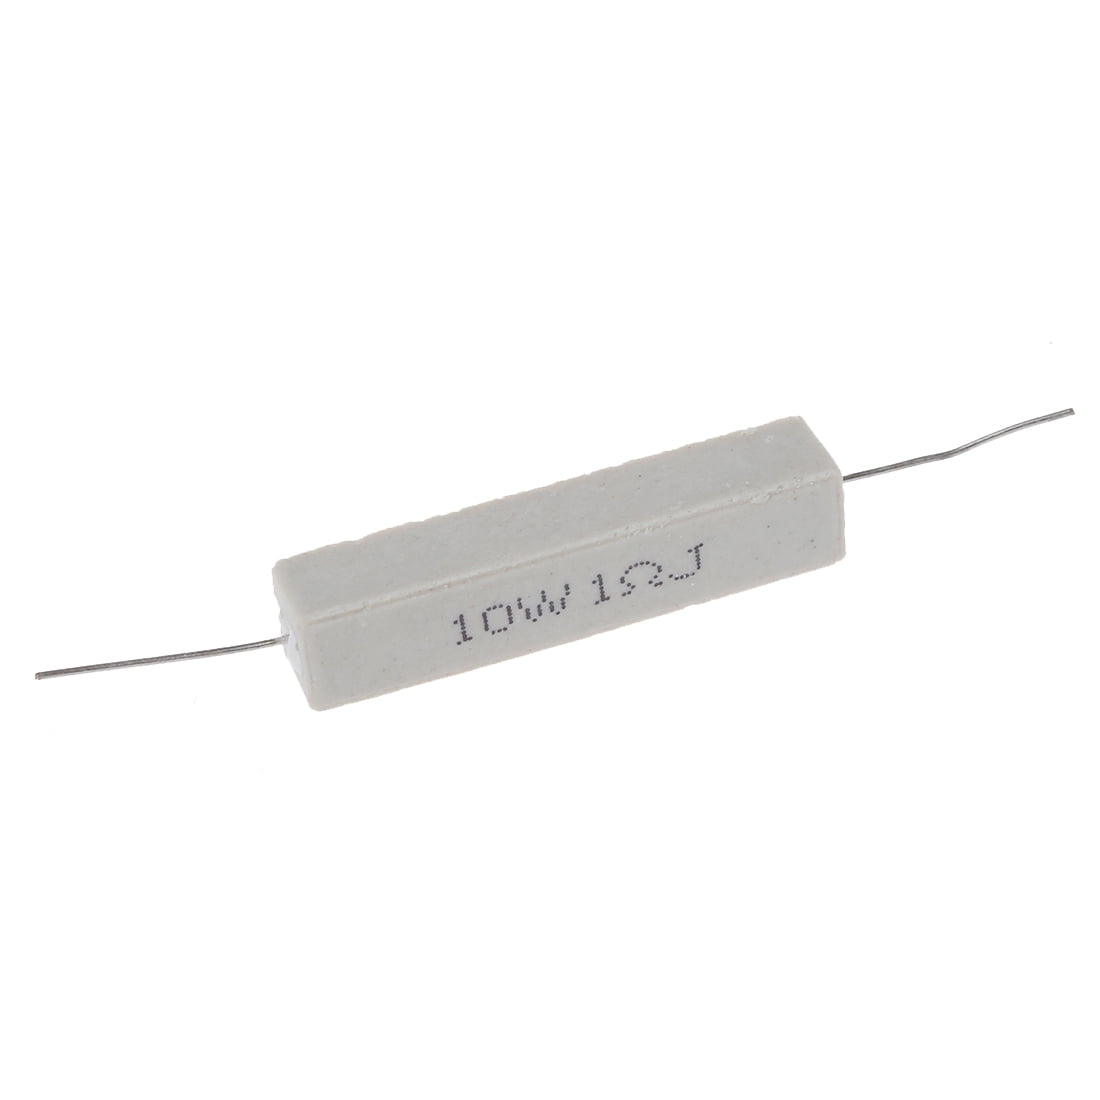 uxcell 10W 5 Ohm Power Resistor Ceramic Cement Resistor Axial Lead 10 Pcs White 